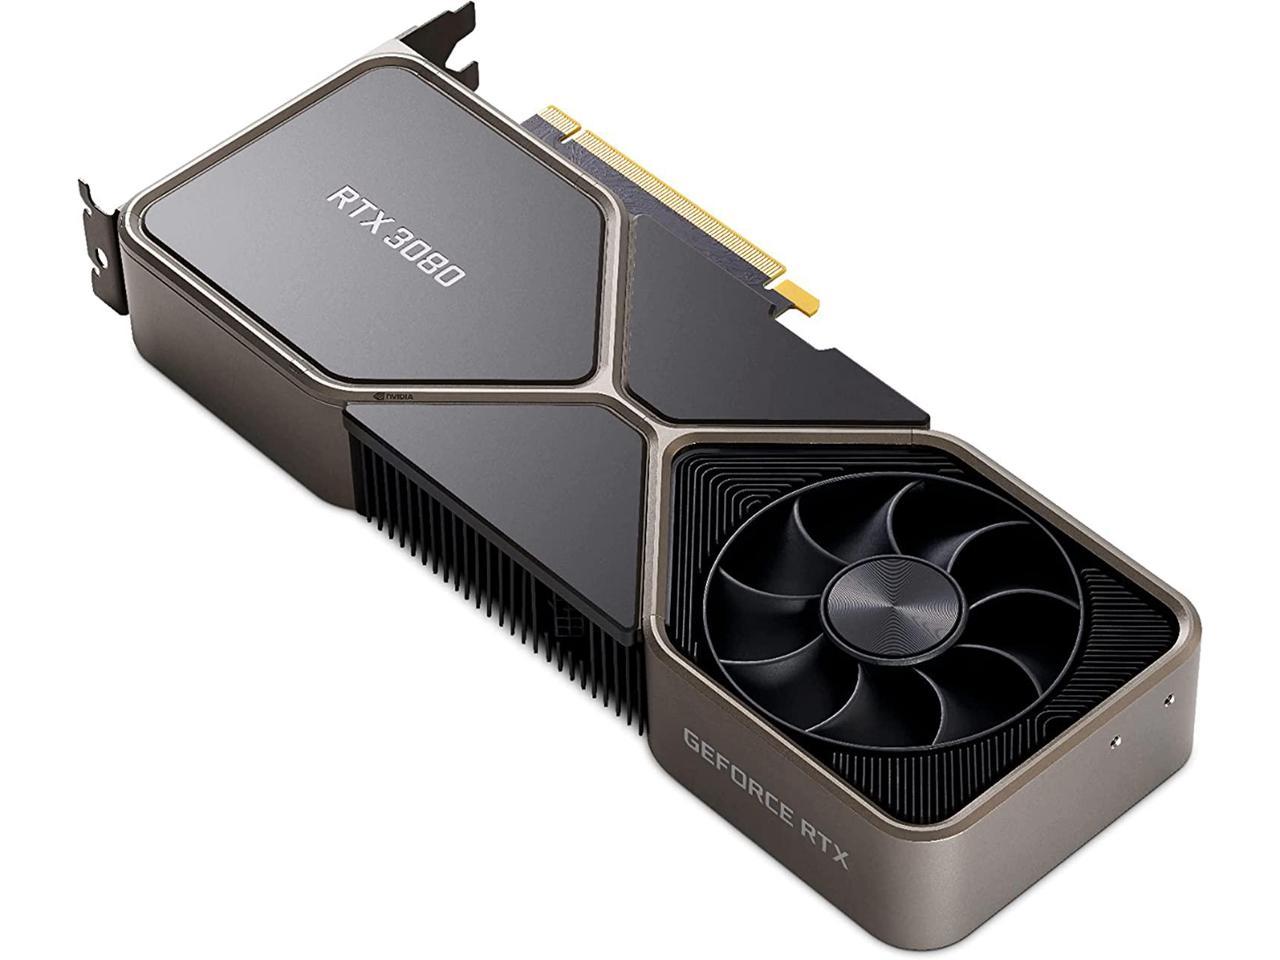 NVIDIA GeForce RTX 3080 Founders Edition 10GB GDDR6 3080 FE Video 